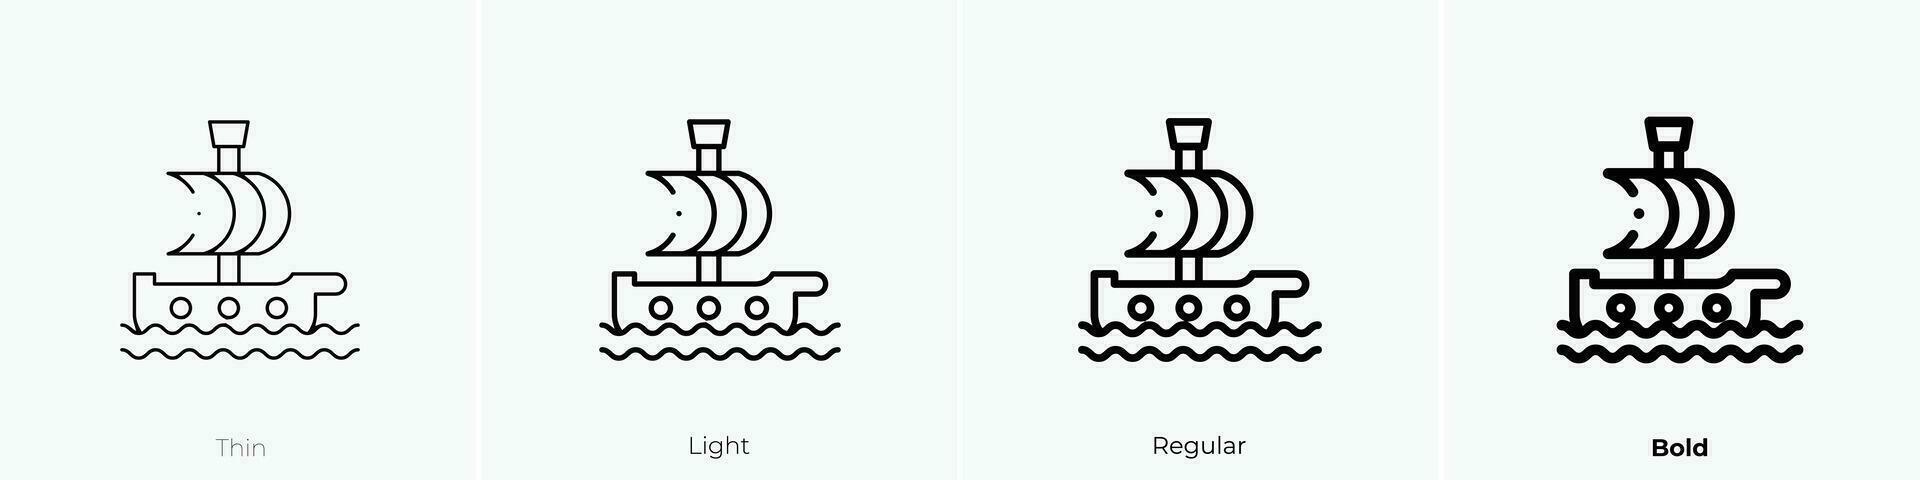 pirate ship icon. Thin, Light, Regular And Bold style design isolated on white background vector